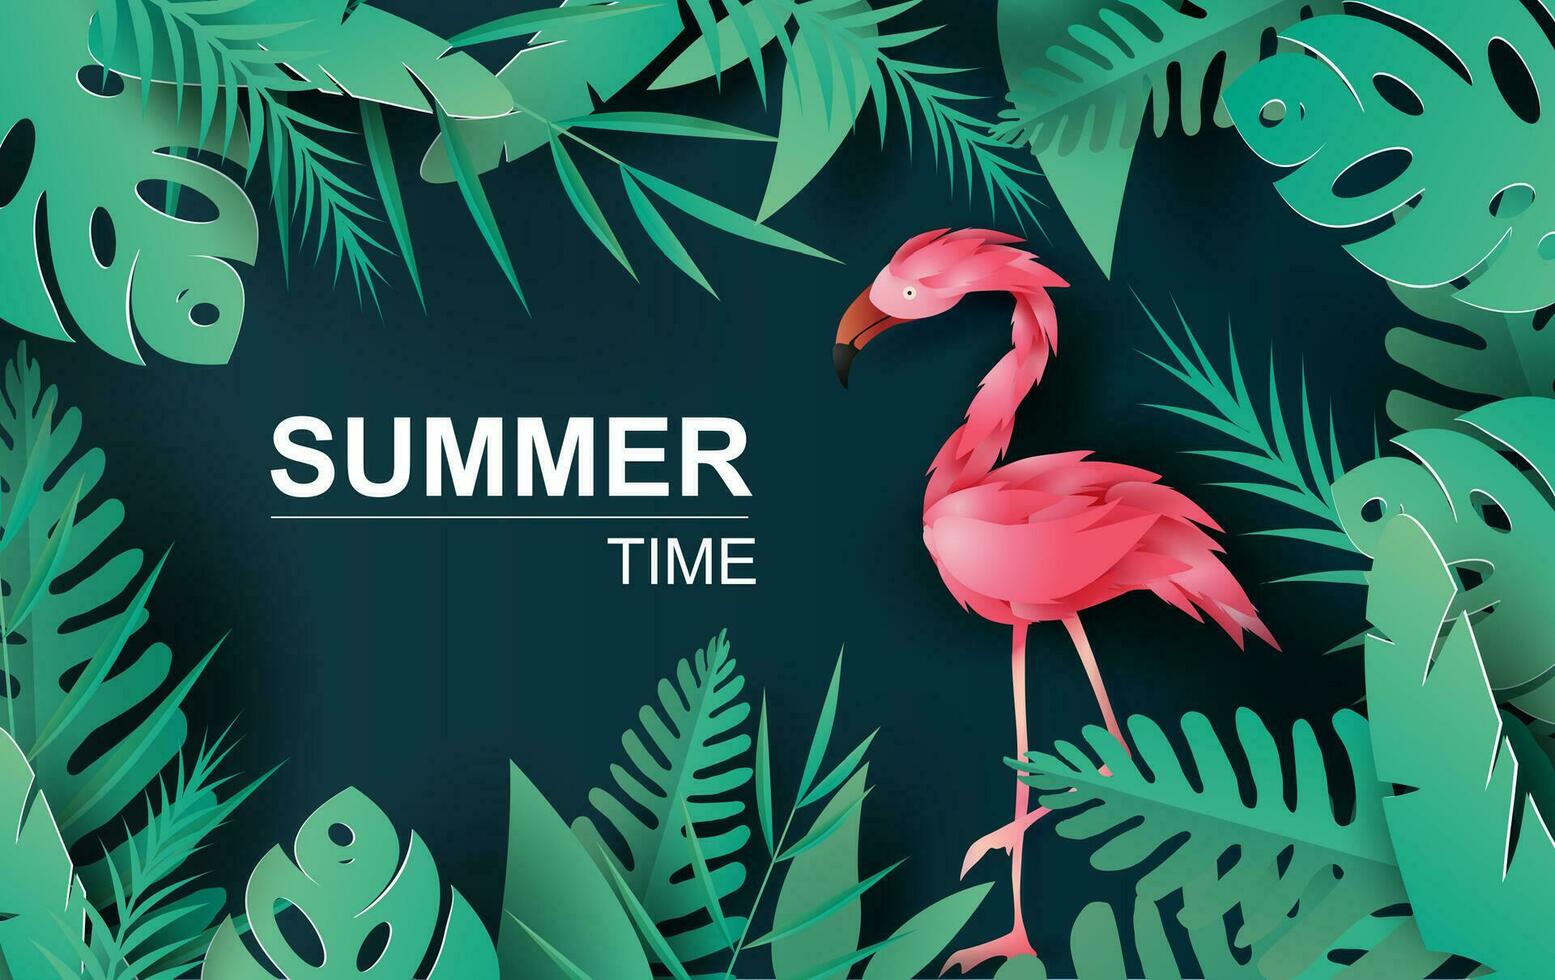 Sale Summer banner with flamingo on tropical exotic background,Minimal simple design for poster, flyer, invitation, card,web site.Creative design Paper cut style,Green jungle vector illustration EPS10